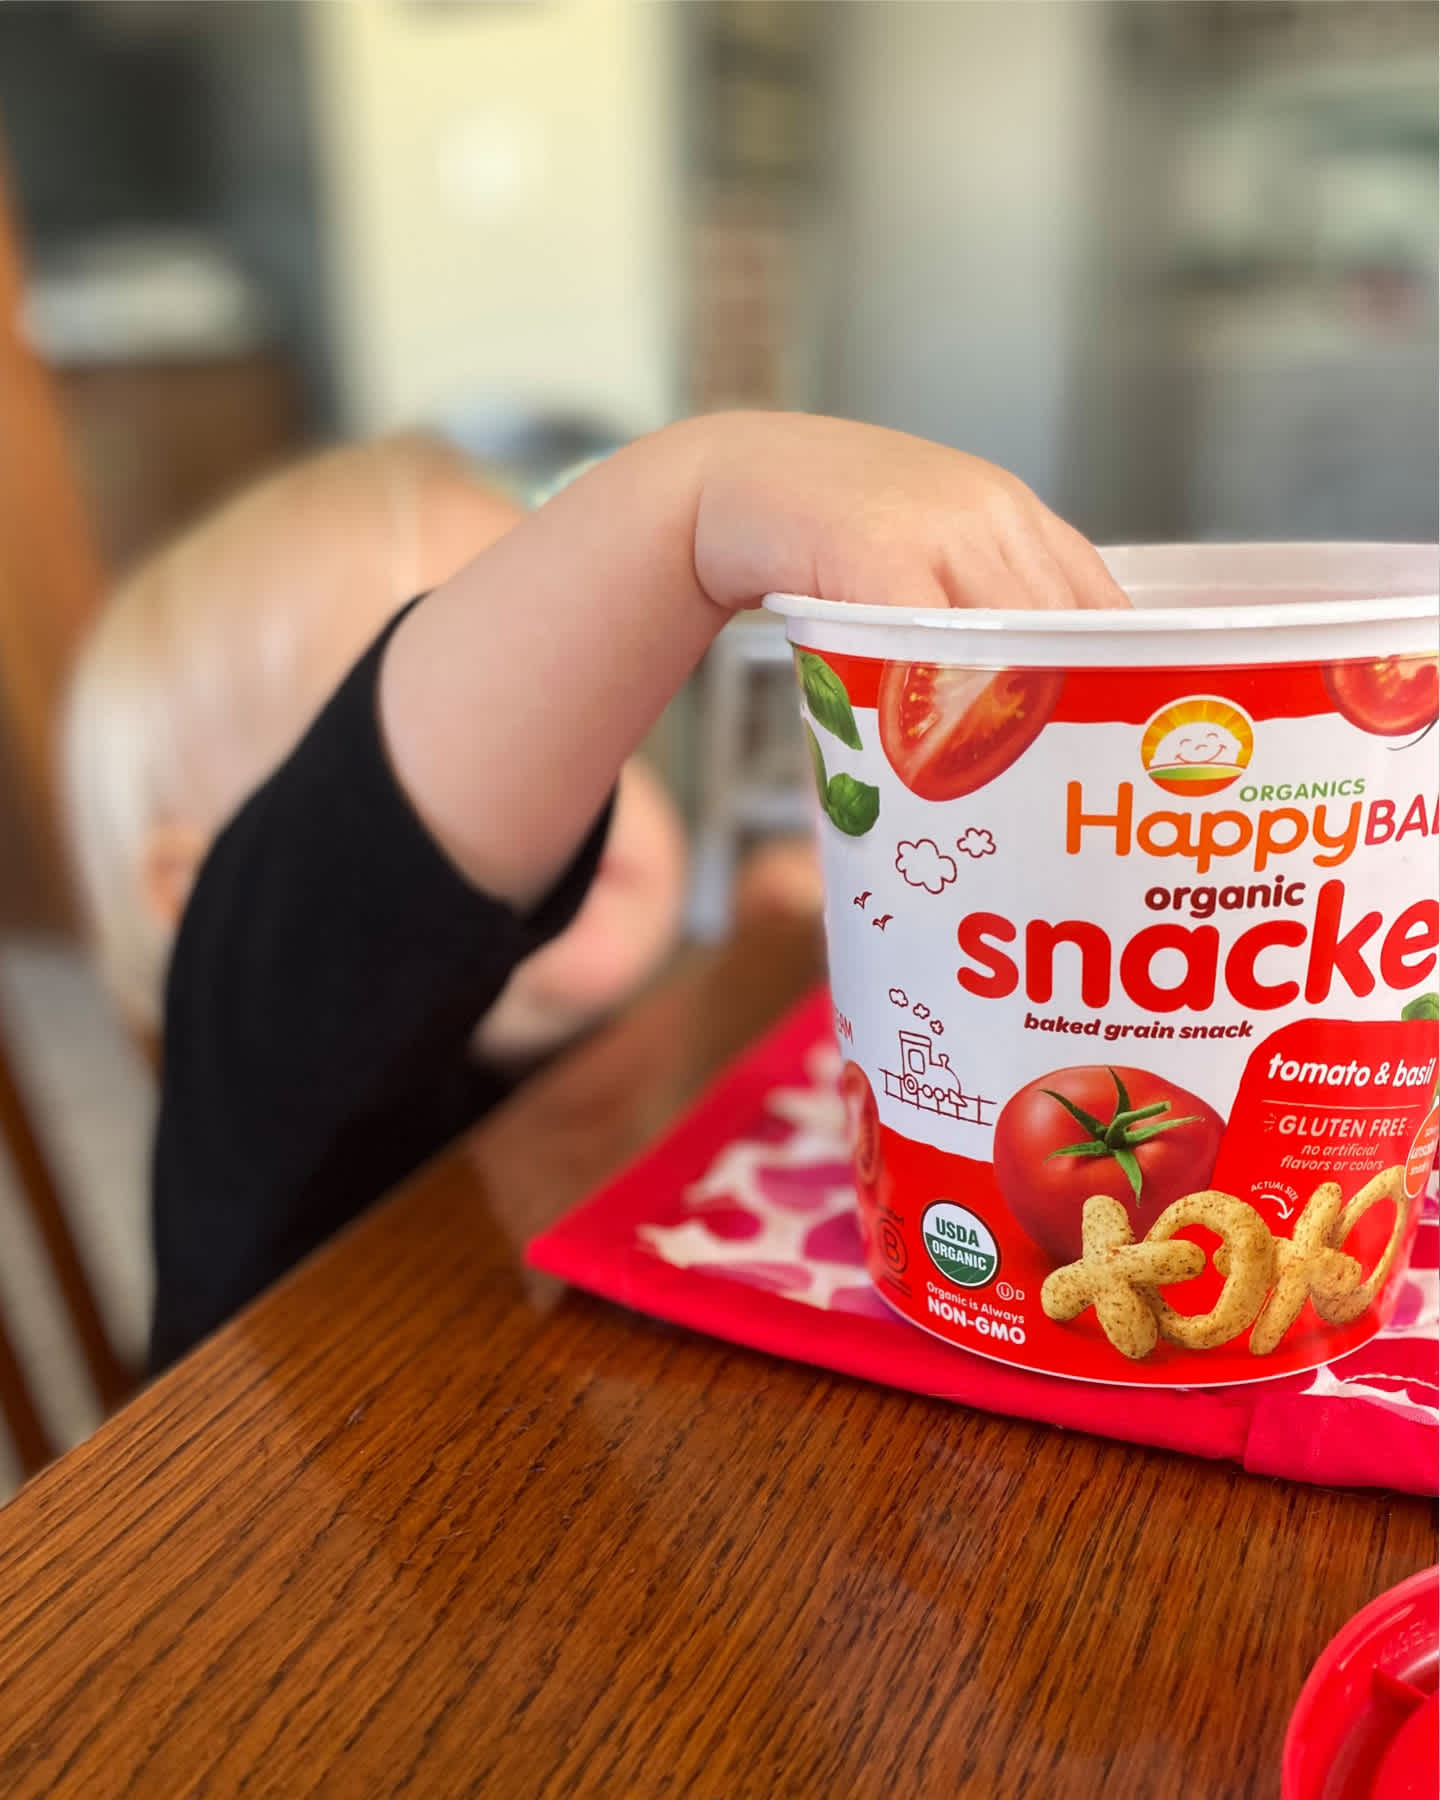 Baby reaching into canister of Happy Baby Snackers on table